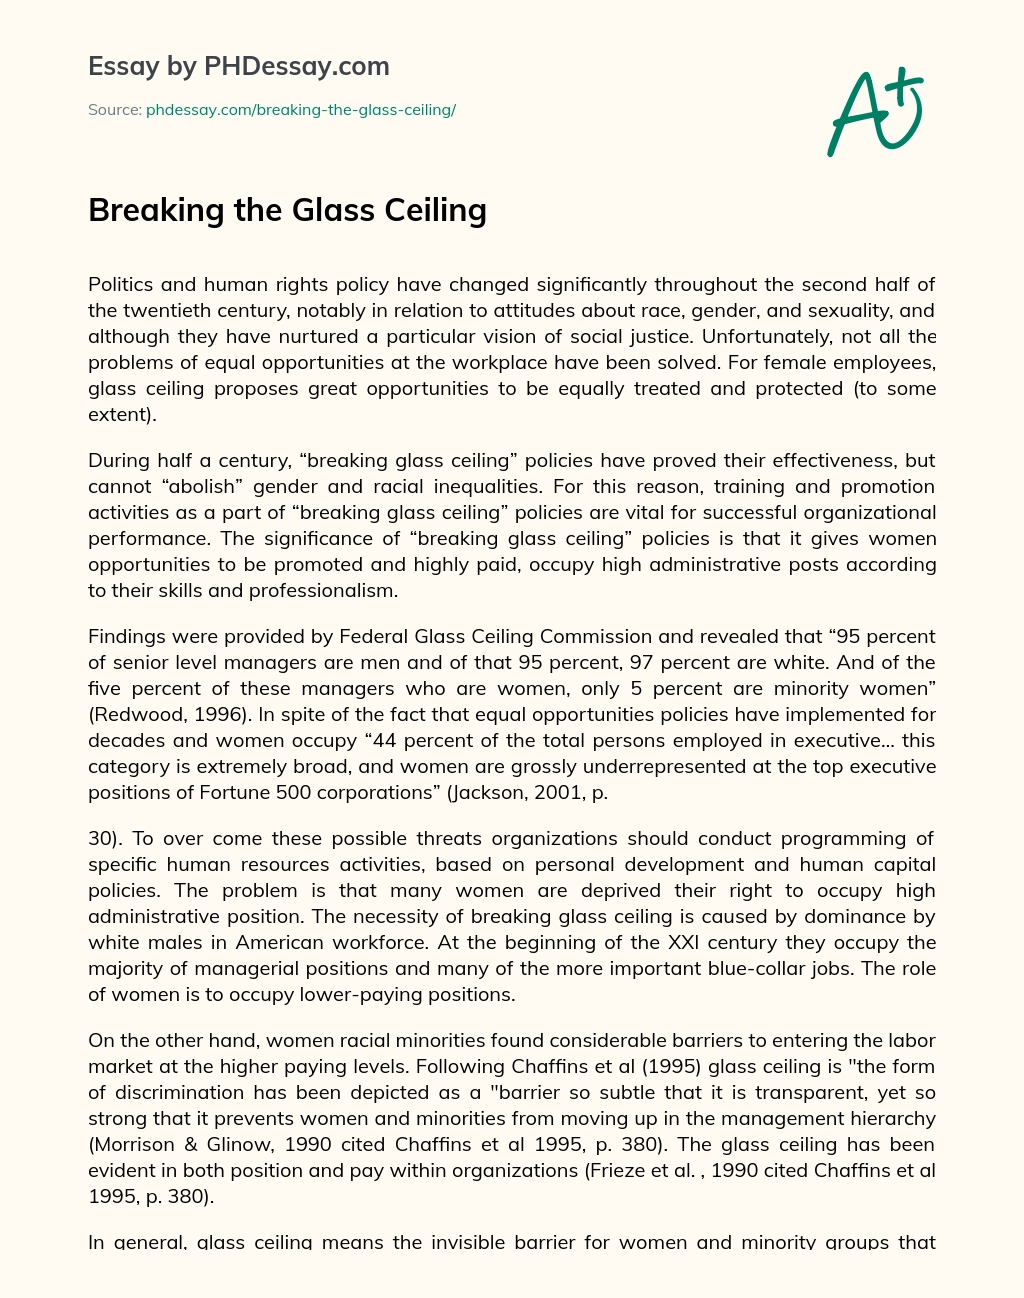 Breaking the Glass Ceiling essay